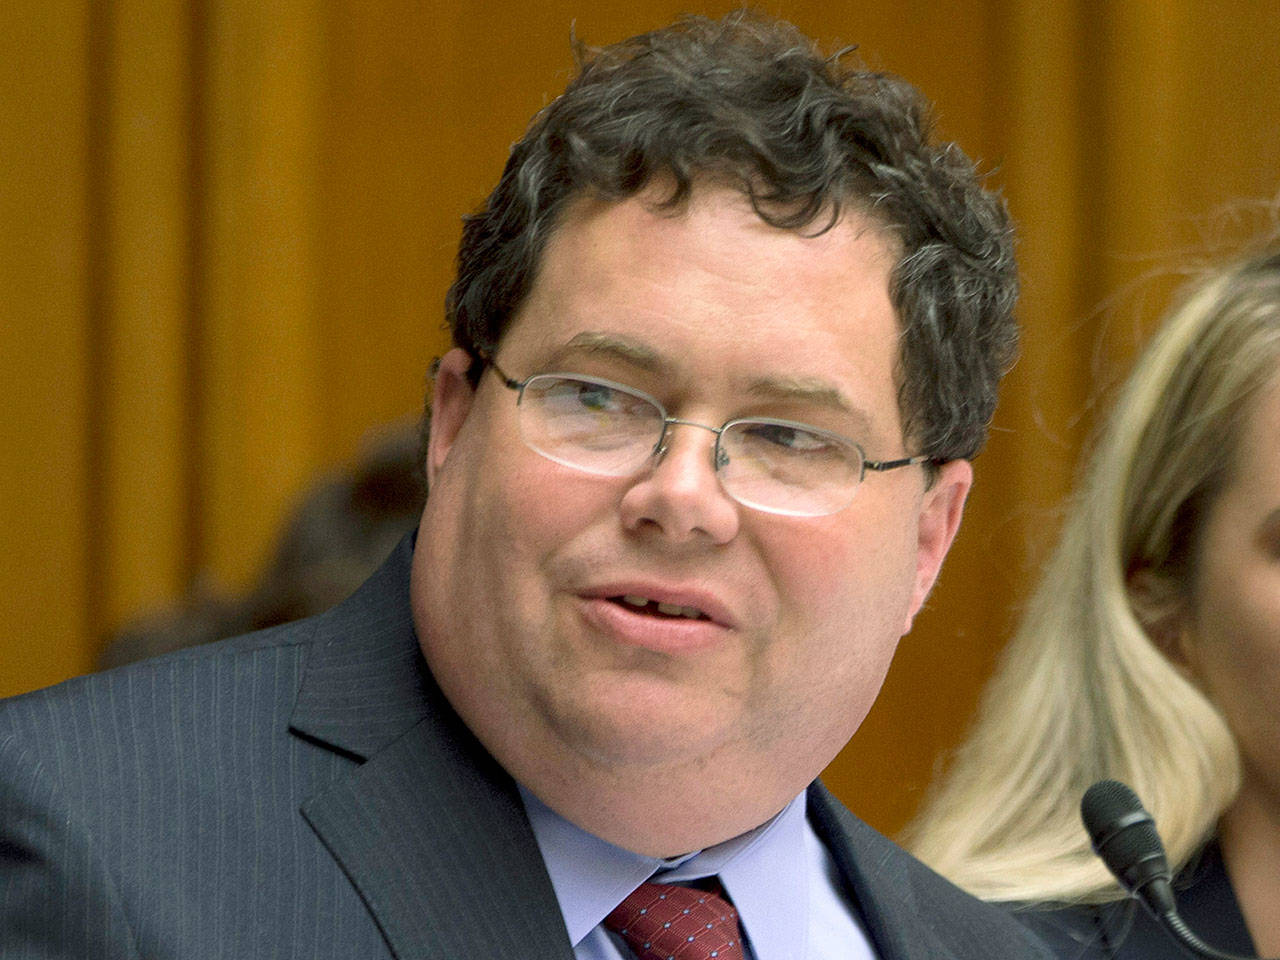 In this March 2013 photo, Rep. Blake Farenthold, R-Texas, is seen on Capitol Hill in Washington. (AP Photo/Jacquelyn Martin, File)